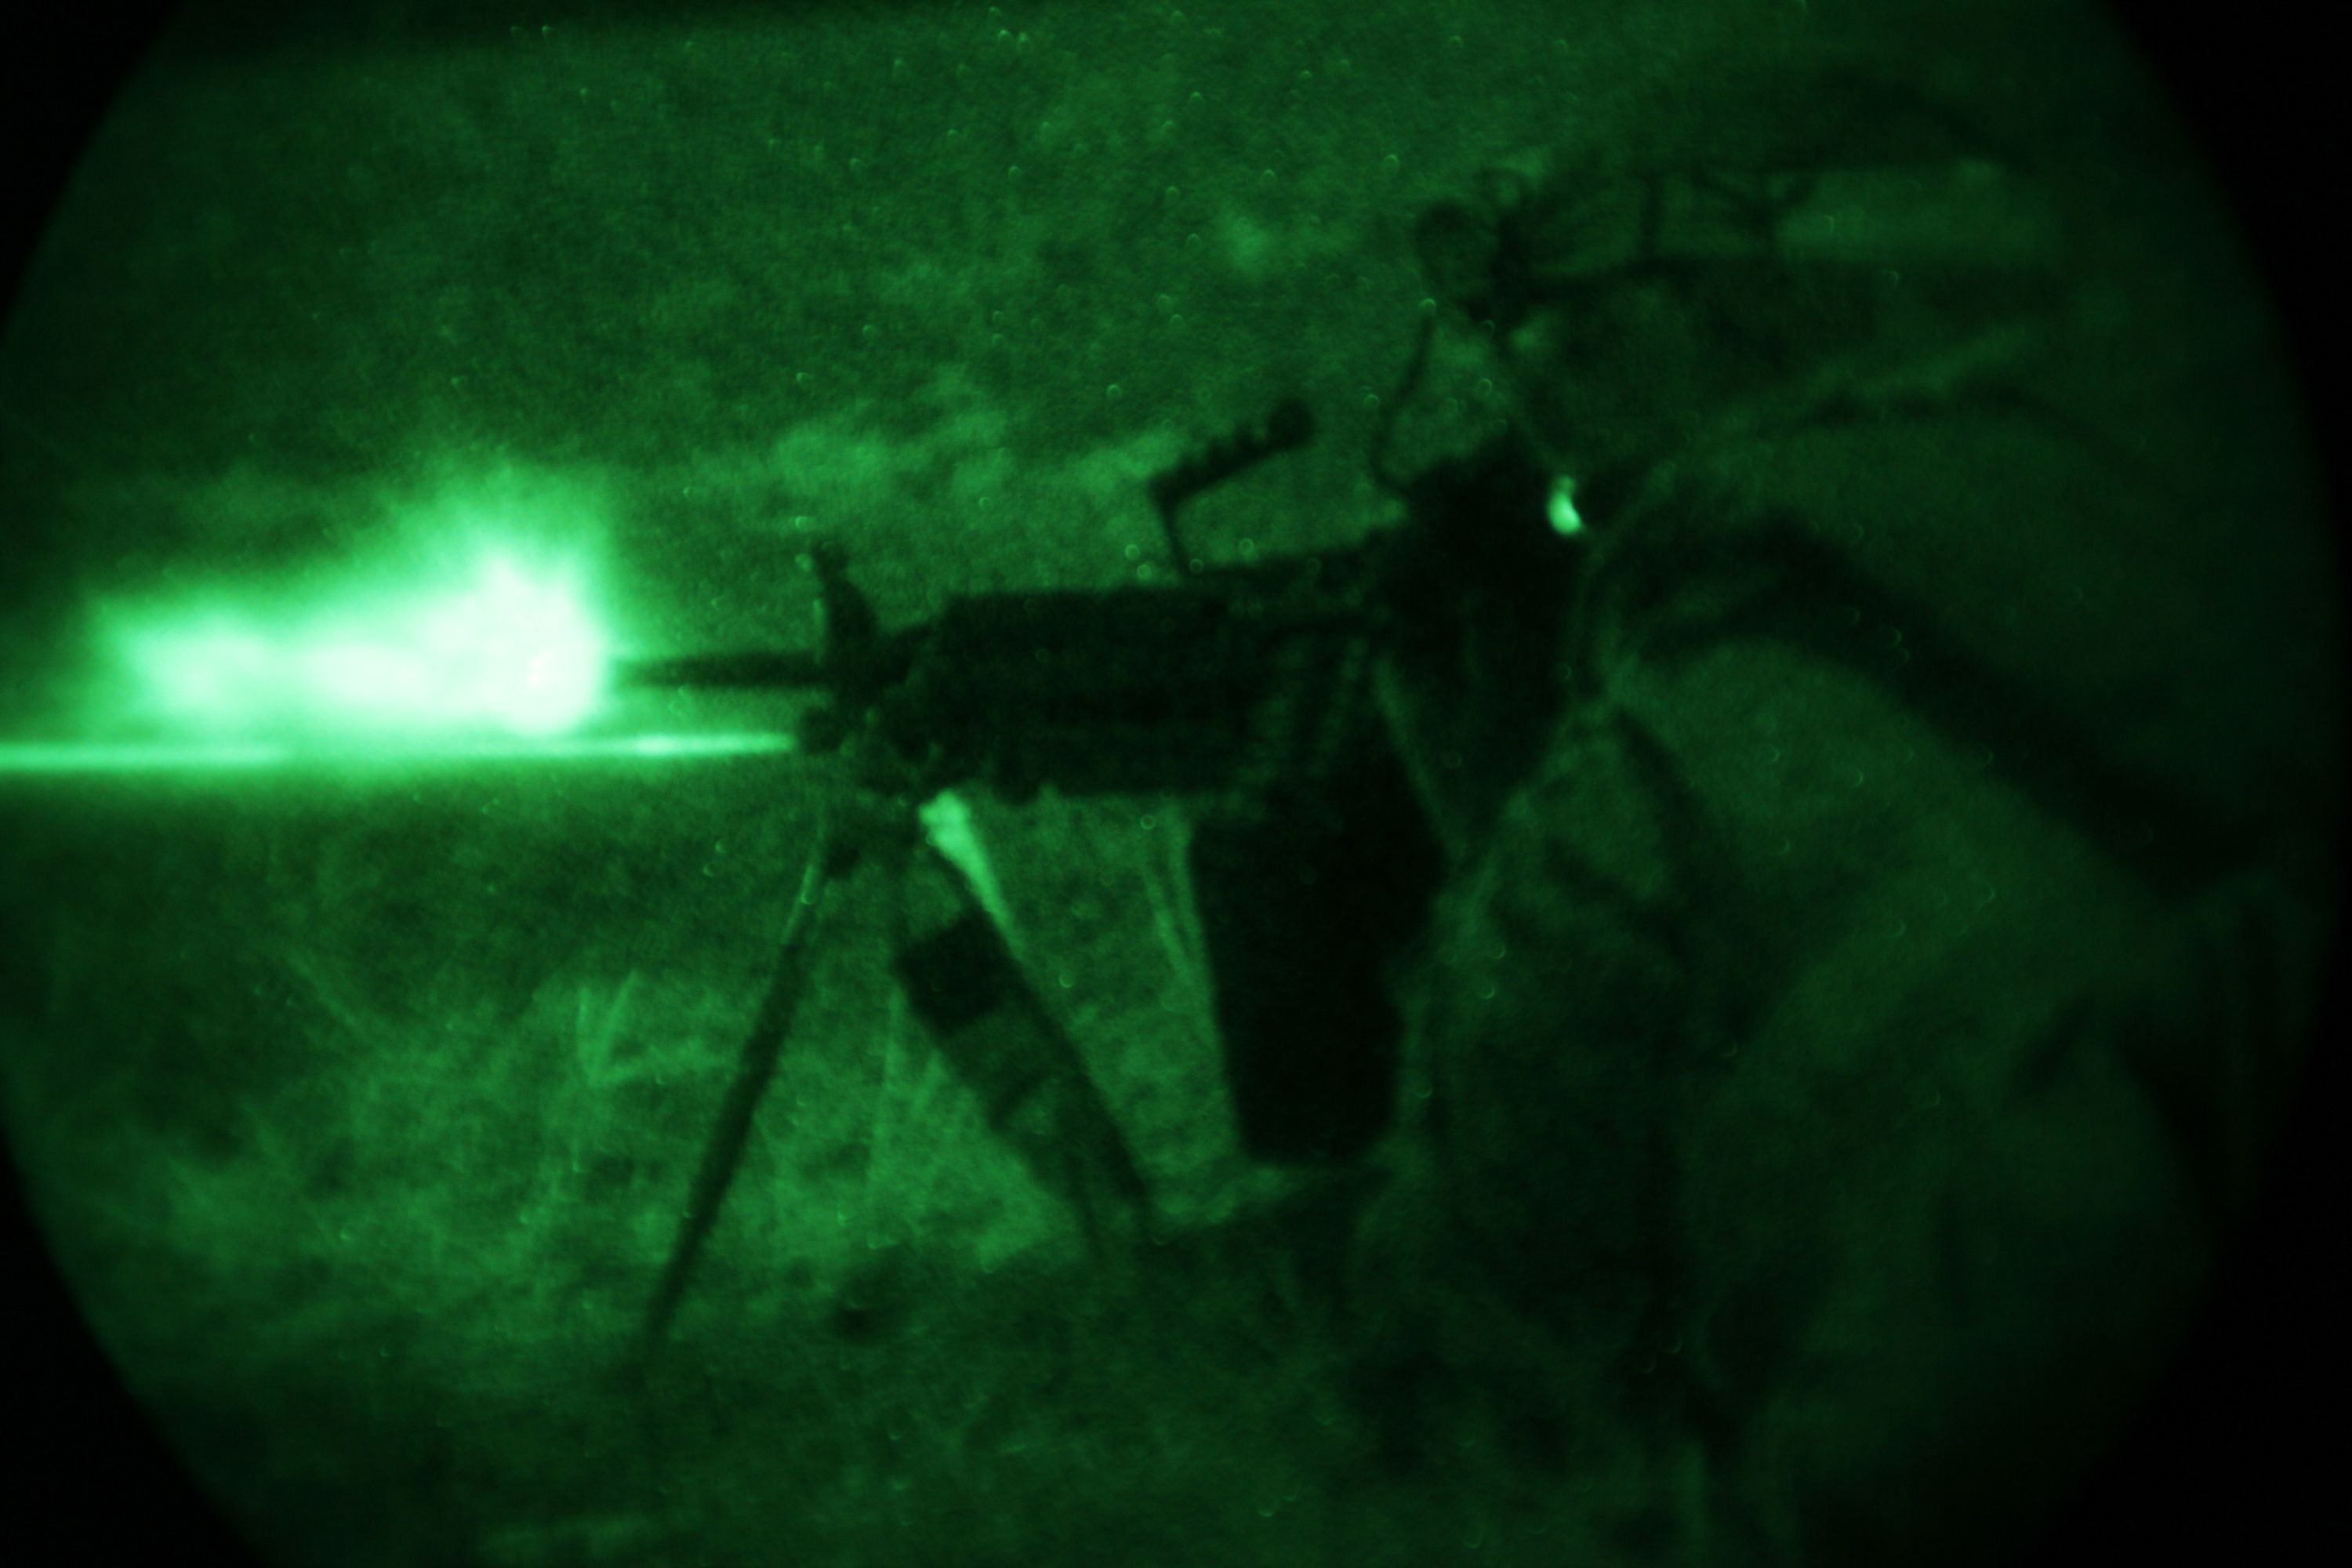 A Marine with Fox Company from the Battalion Landing Team, 2nd Battalion, 2nd Marine Regiment, 22nd Marine Expeditionary Unit, fires an M249 squad automatic weapon during a night assault at the infantry platoon battle course aboard Fort Pickett, Va., Dec. 13, 2010.